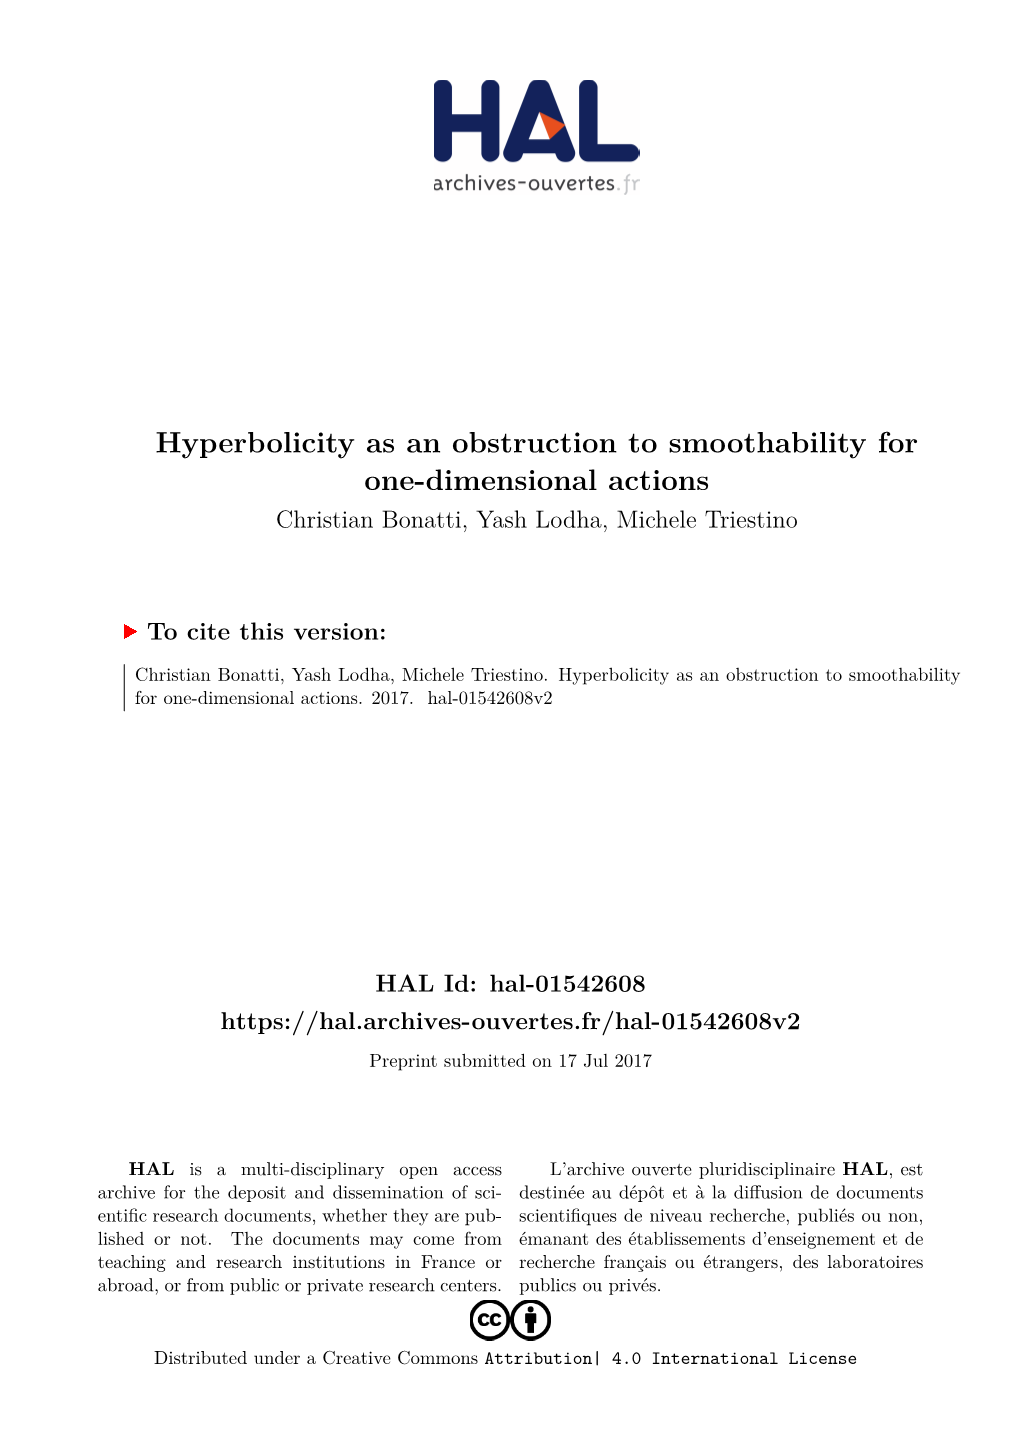 Hyperbolicity As an Obstruction to Smoothability for One-Dimensional Actions Christian Bonatti, Yash Lodha, Michele Triestino